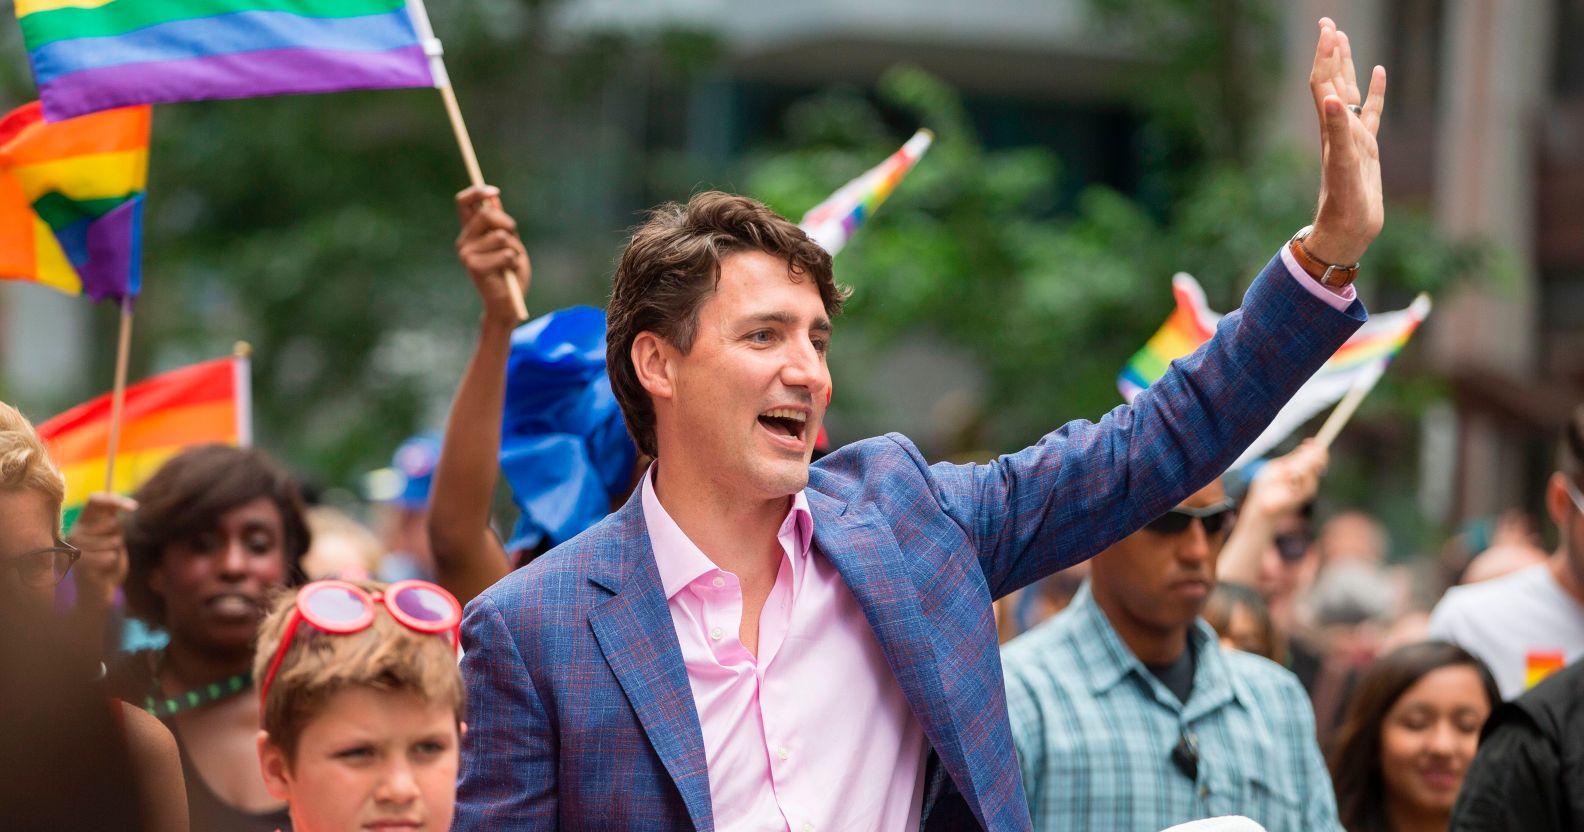 This is what Justin Trudeau win means for Canada's LGBT community